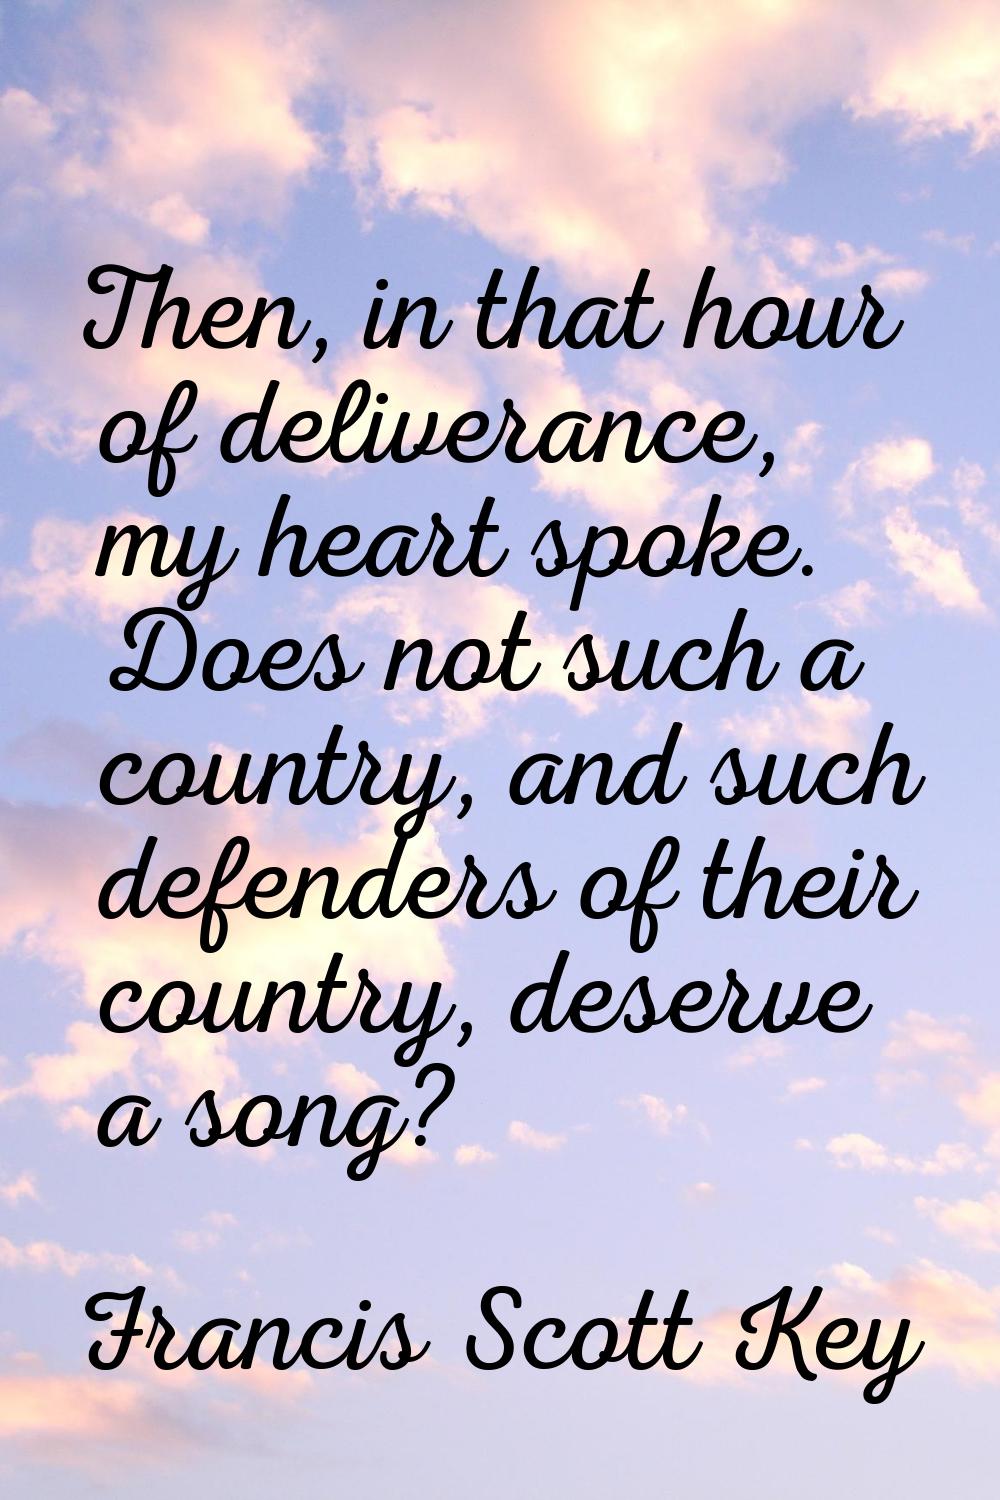 Then, in that hour of deliverance, my heart spoke. Does not such a country, and such defenders of t